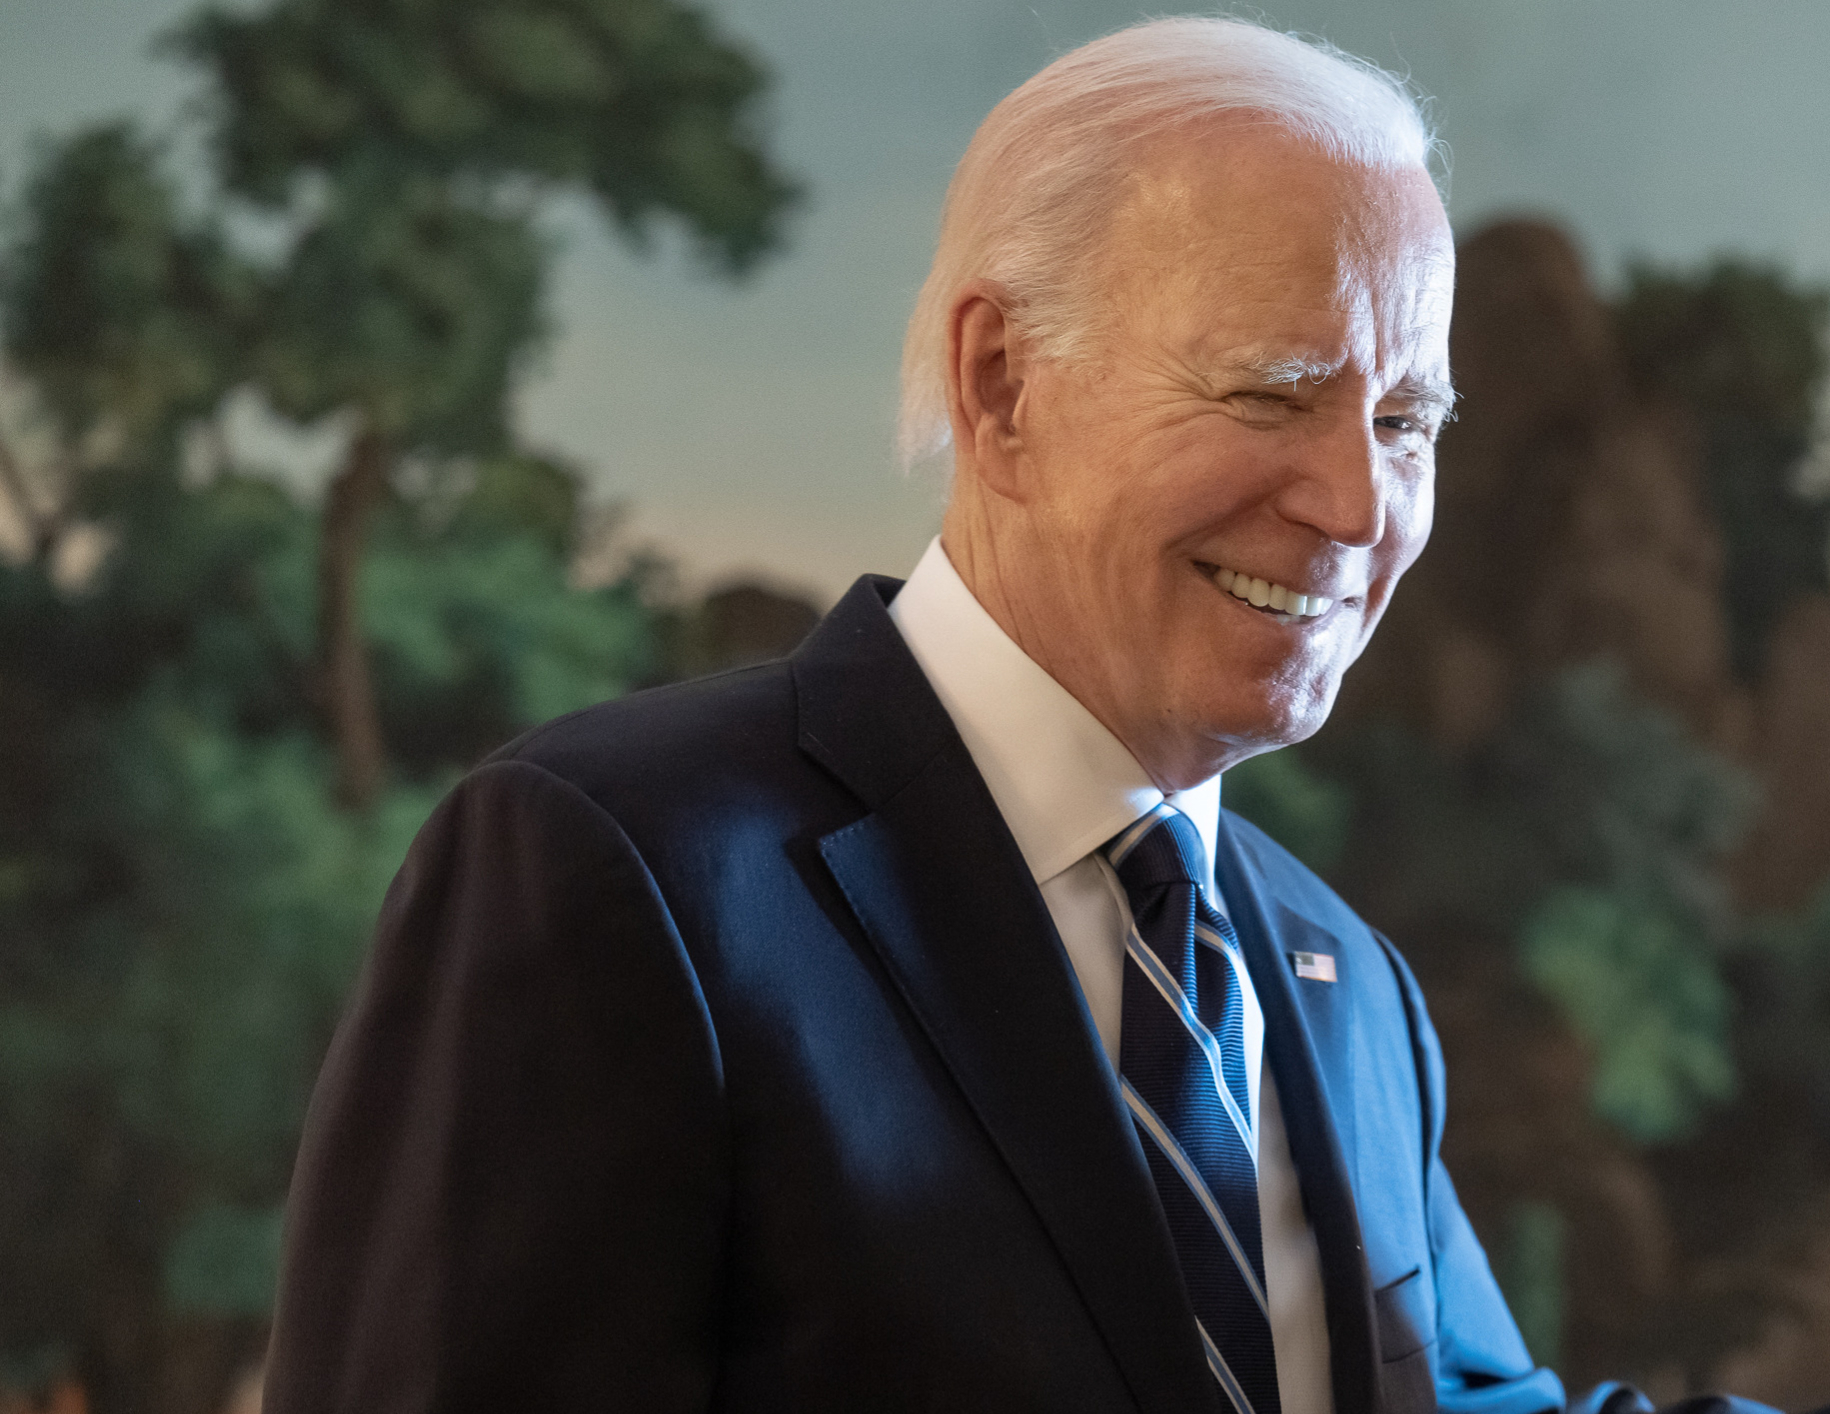 Grinning Joe Biden with trees in background does not satisfy young voters